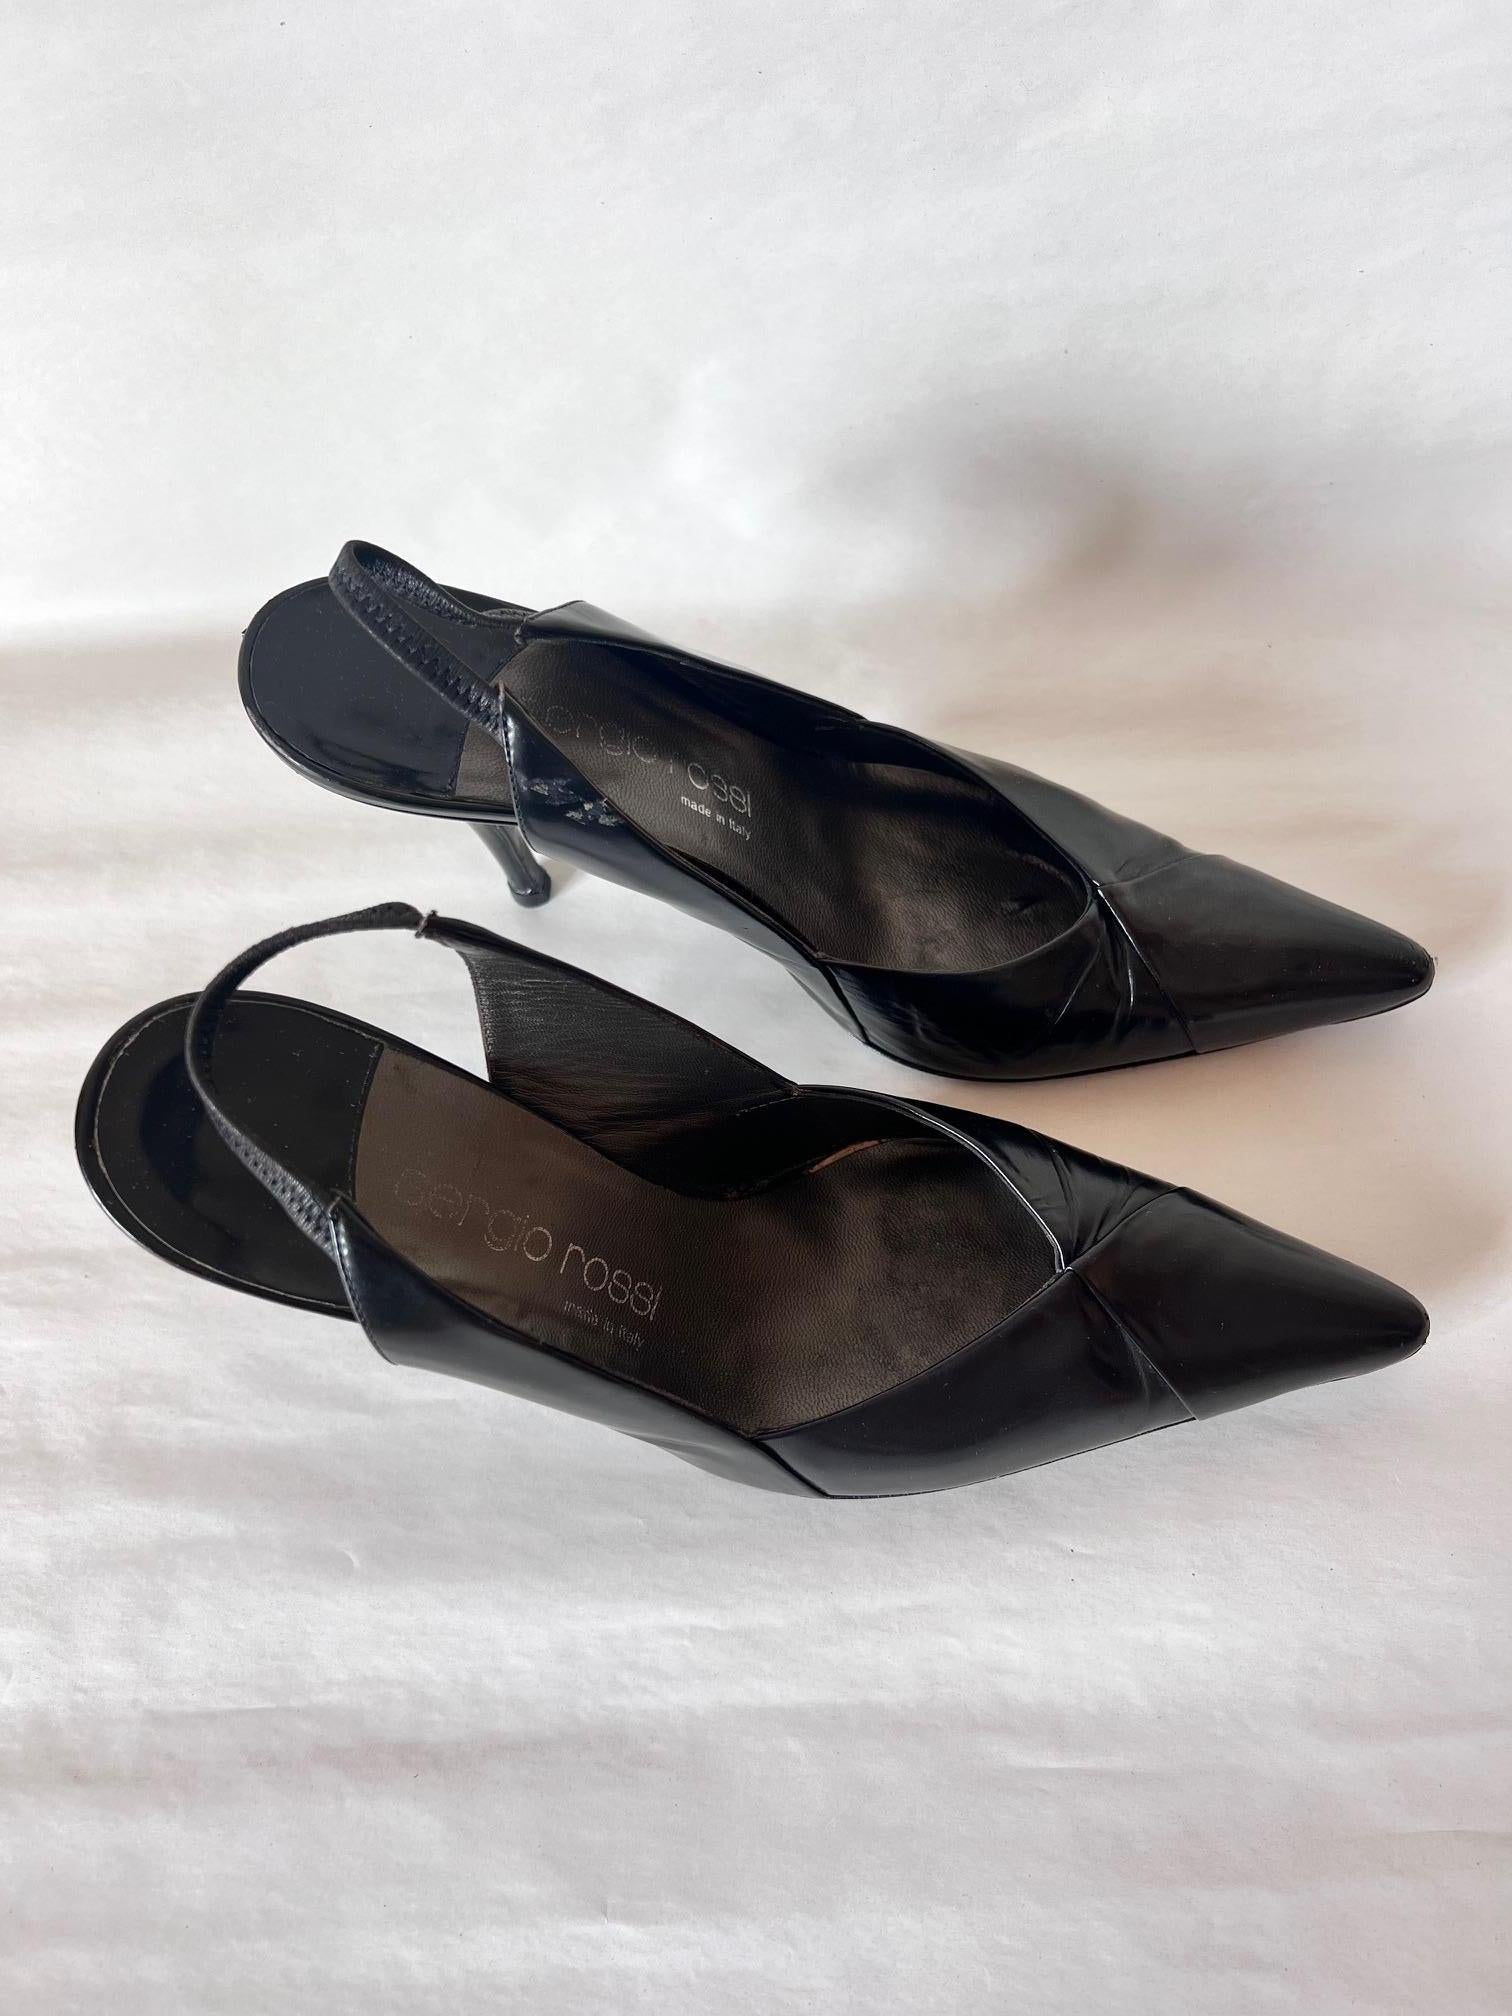 Sergio Rossi Black Satin Leather Cocktail Open Back Shoes For Sale 3